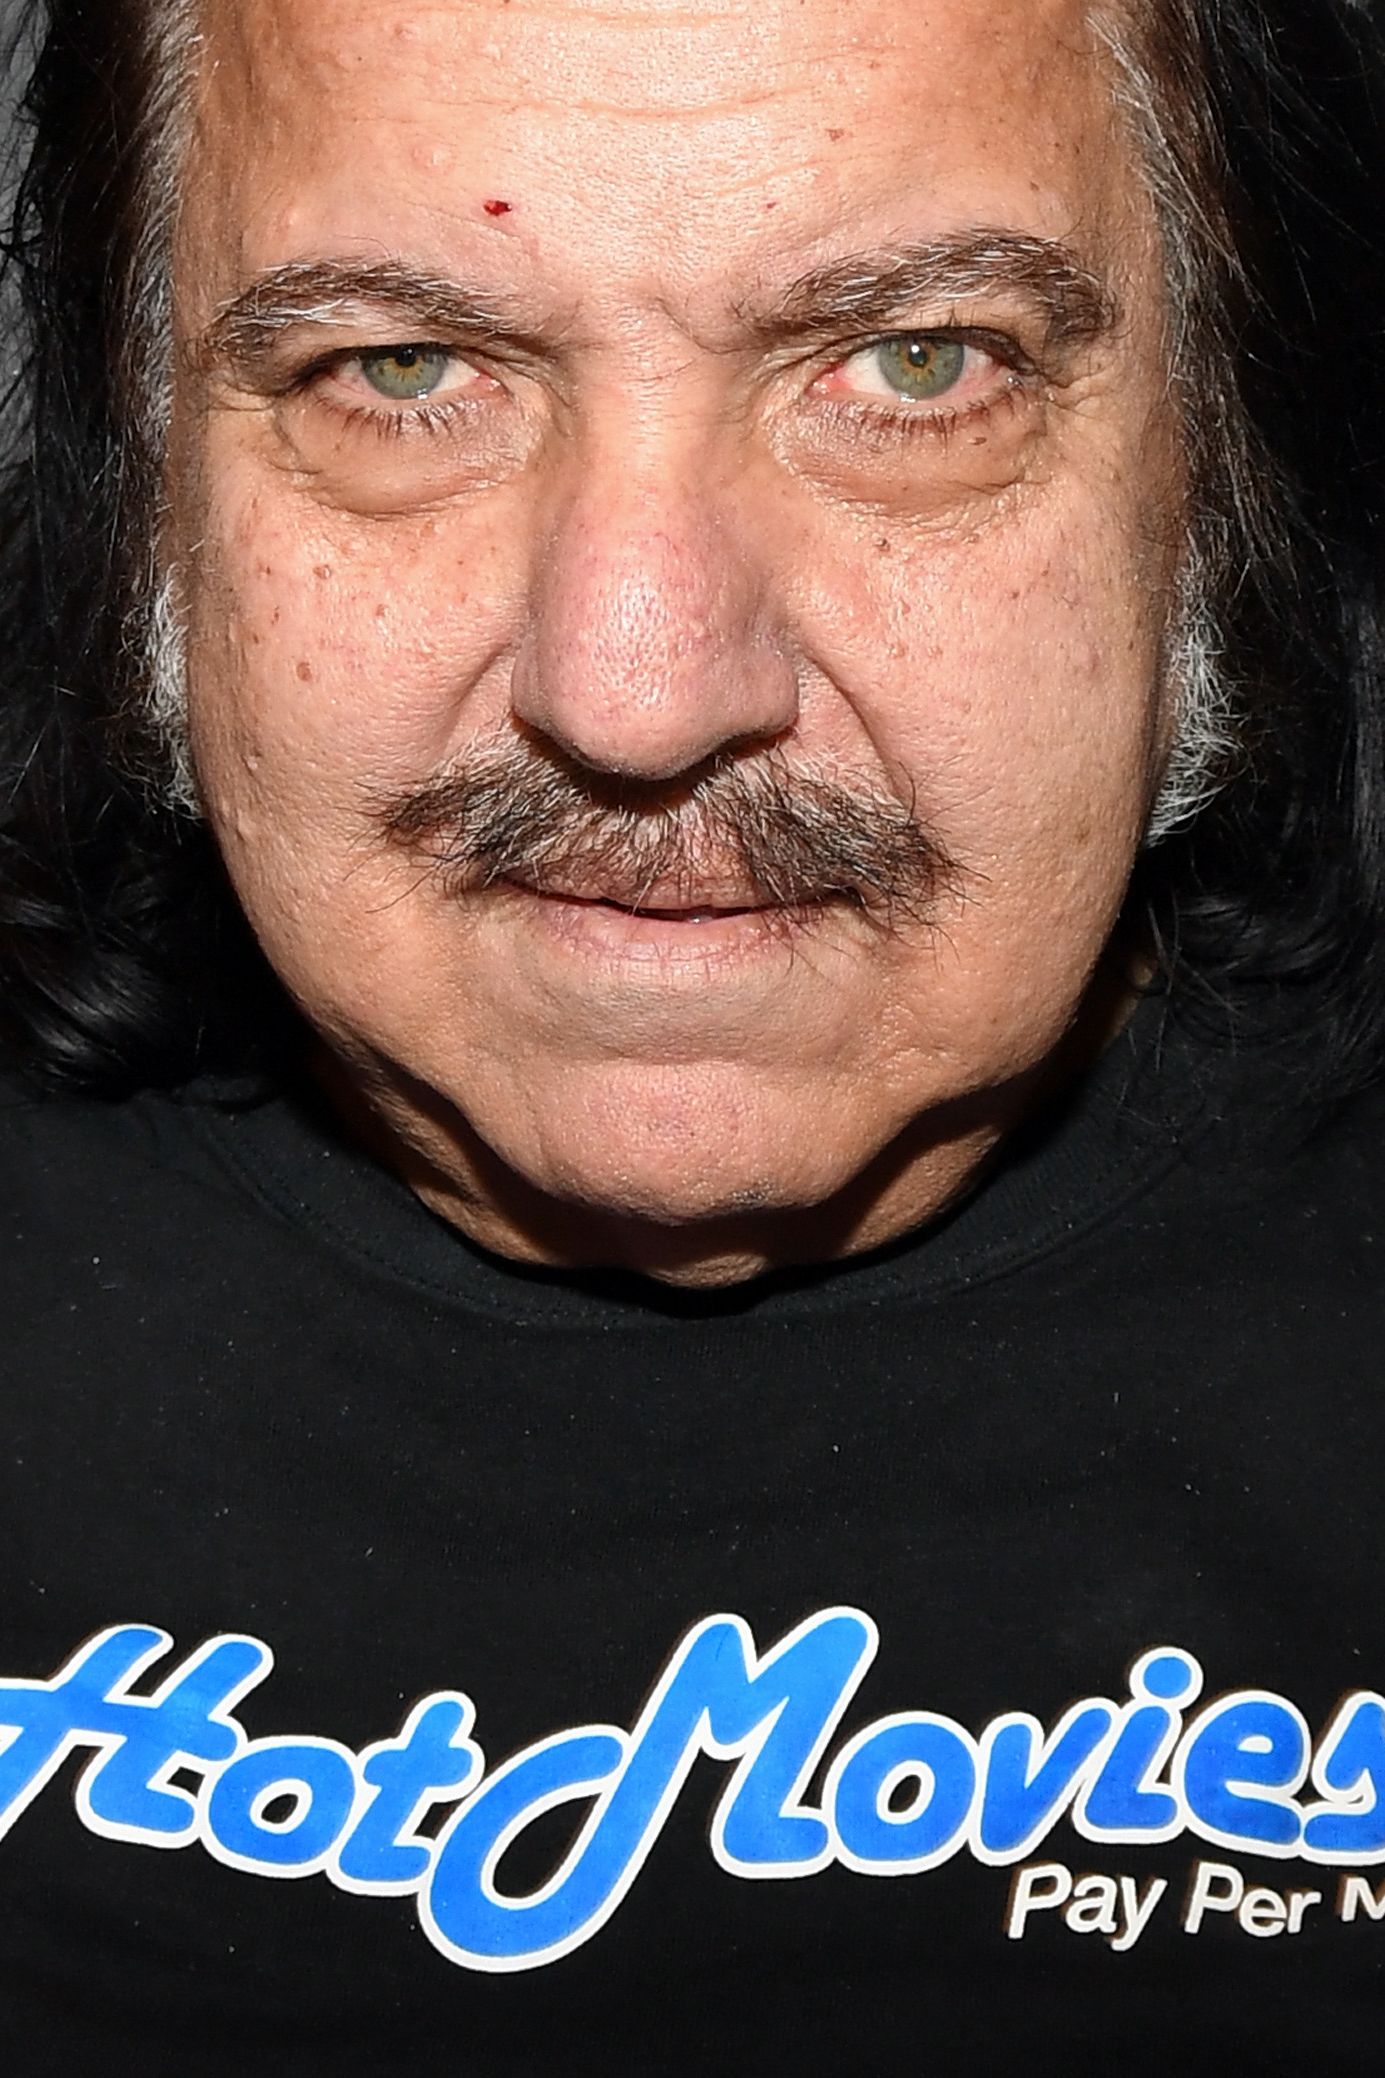 Xxx Rapes Vedio In English - Porn star Ron Jeremy faces 20 more sexual assault charges | CNN